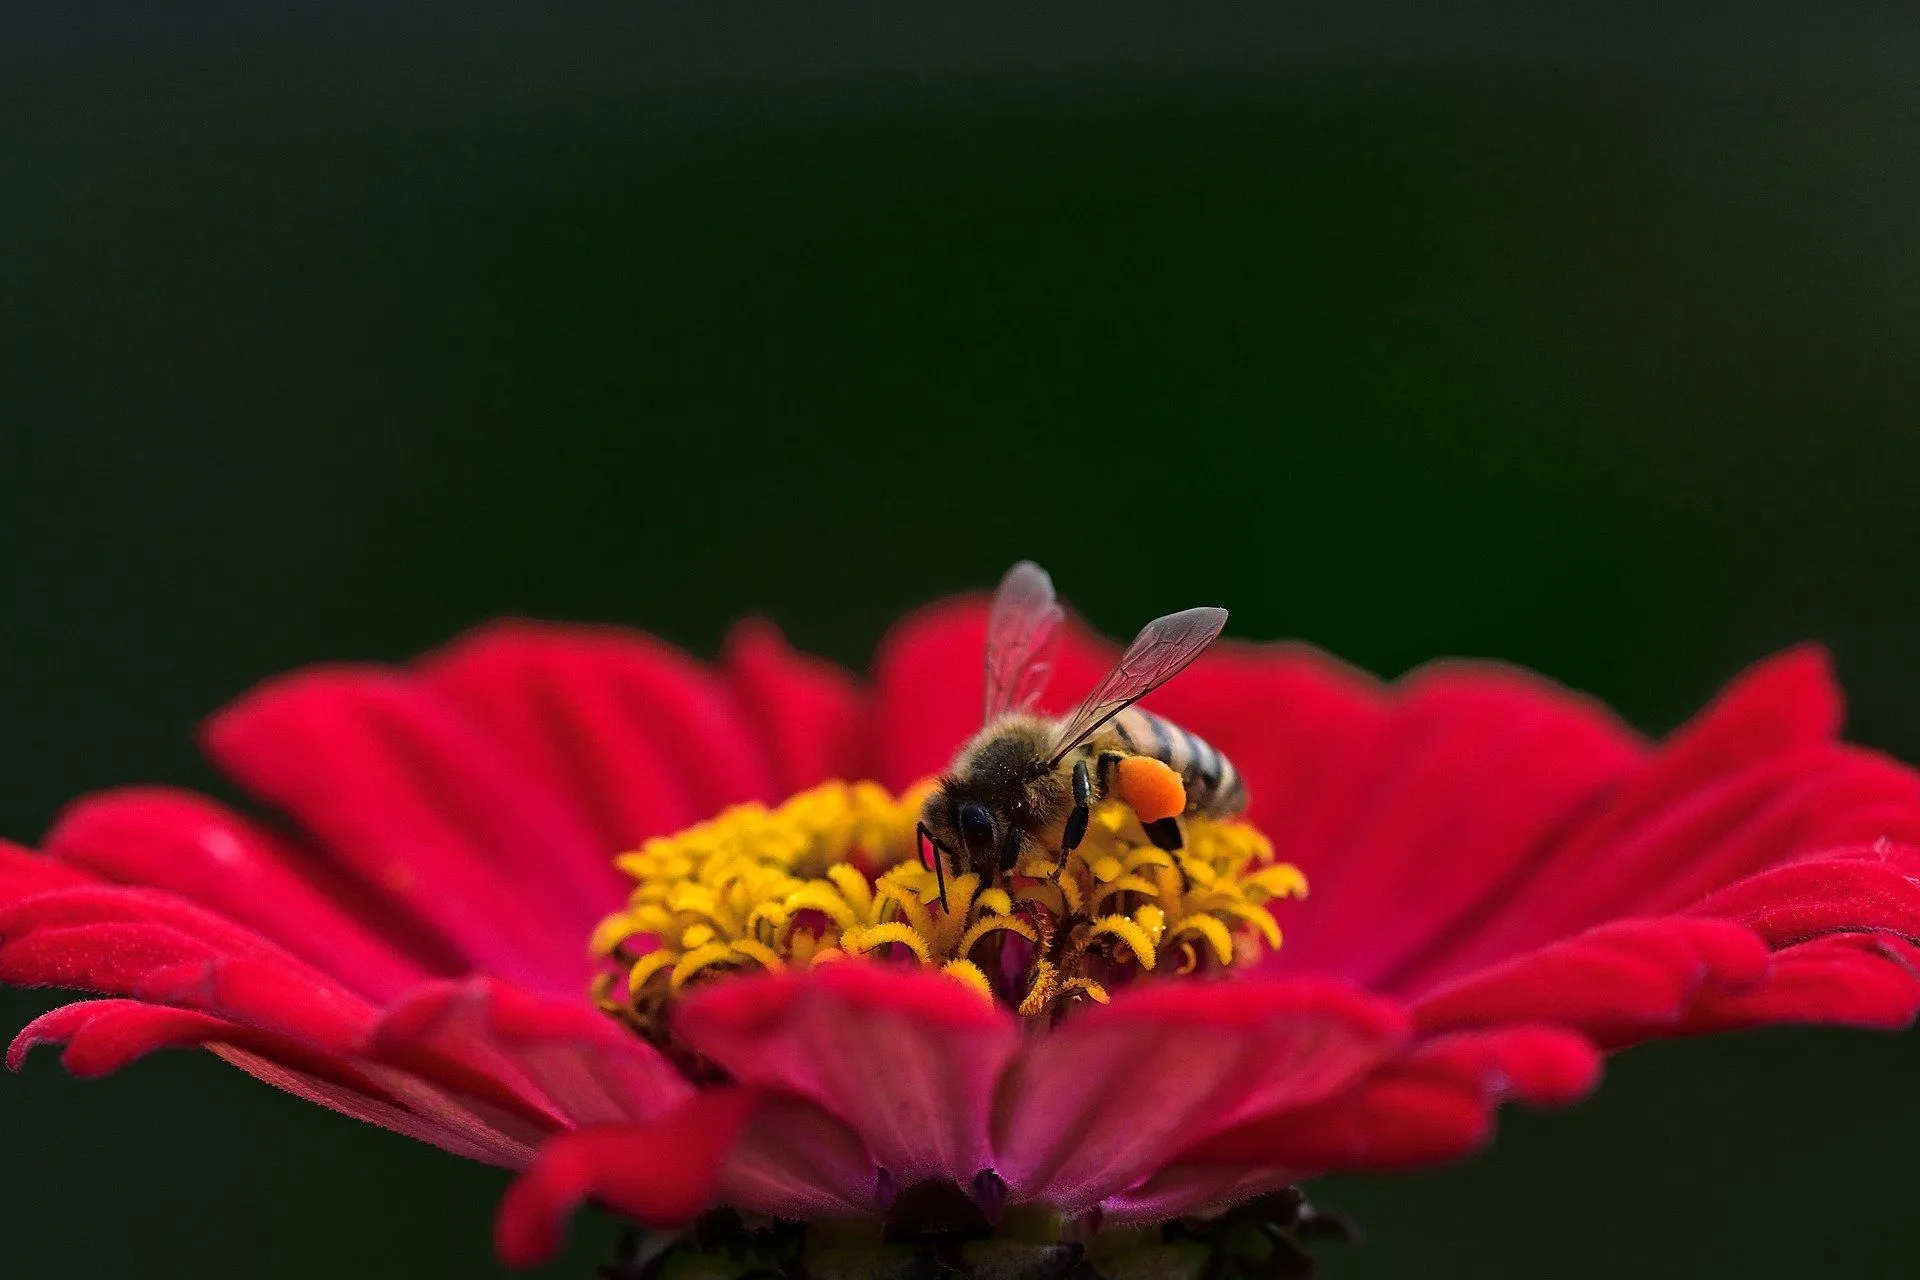 Honey bees have to collect nectar from 2 million flowers to make a pound of honey.